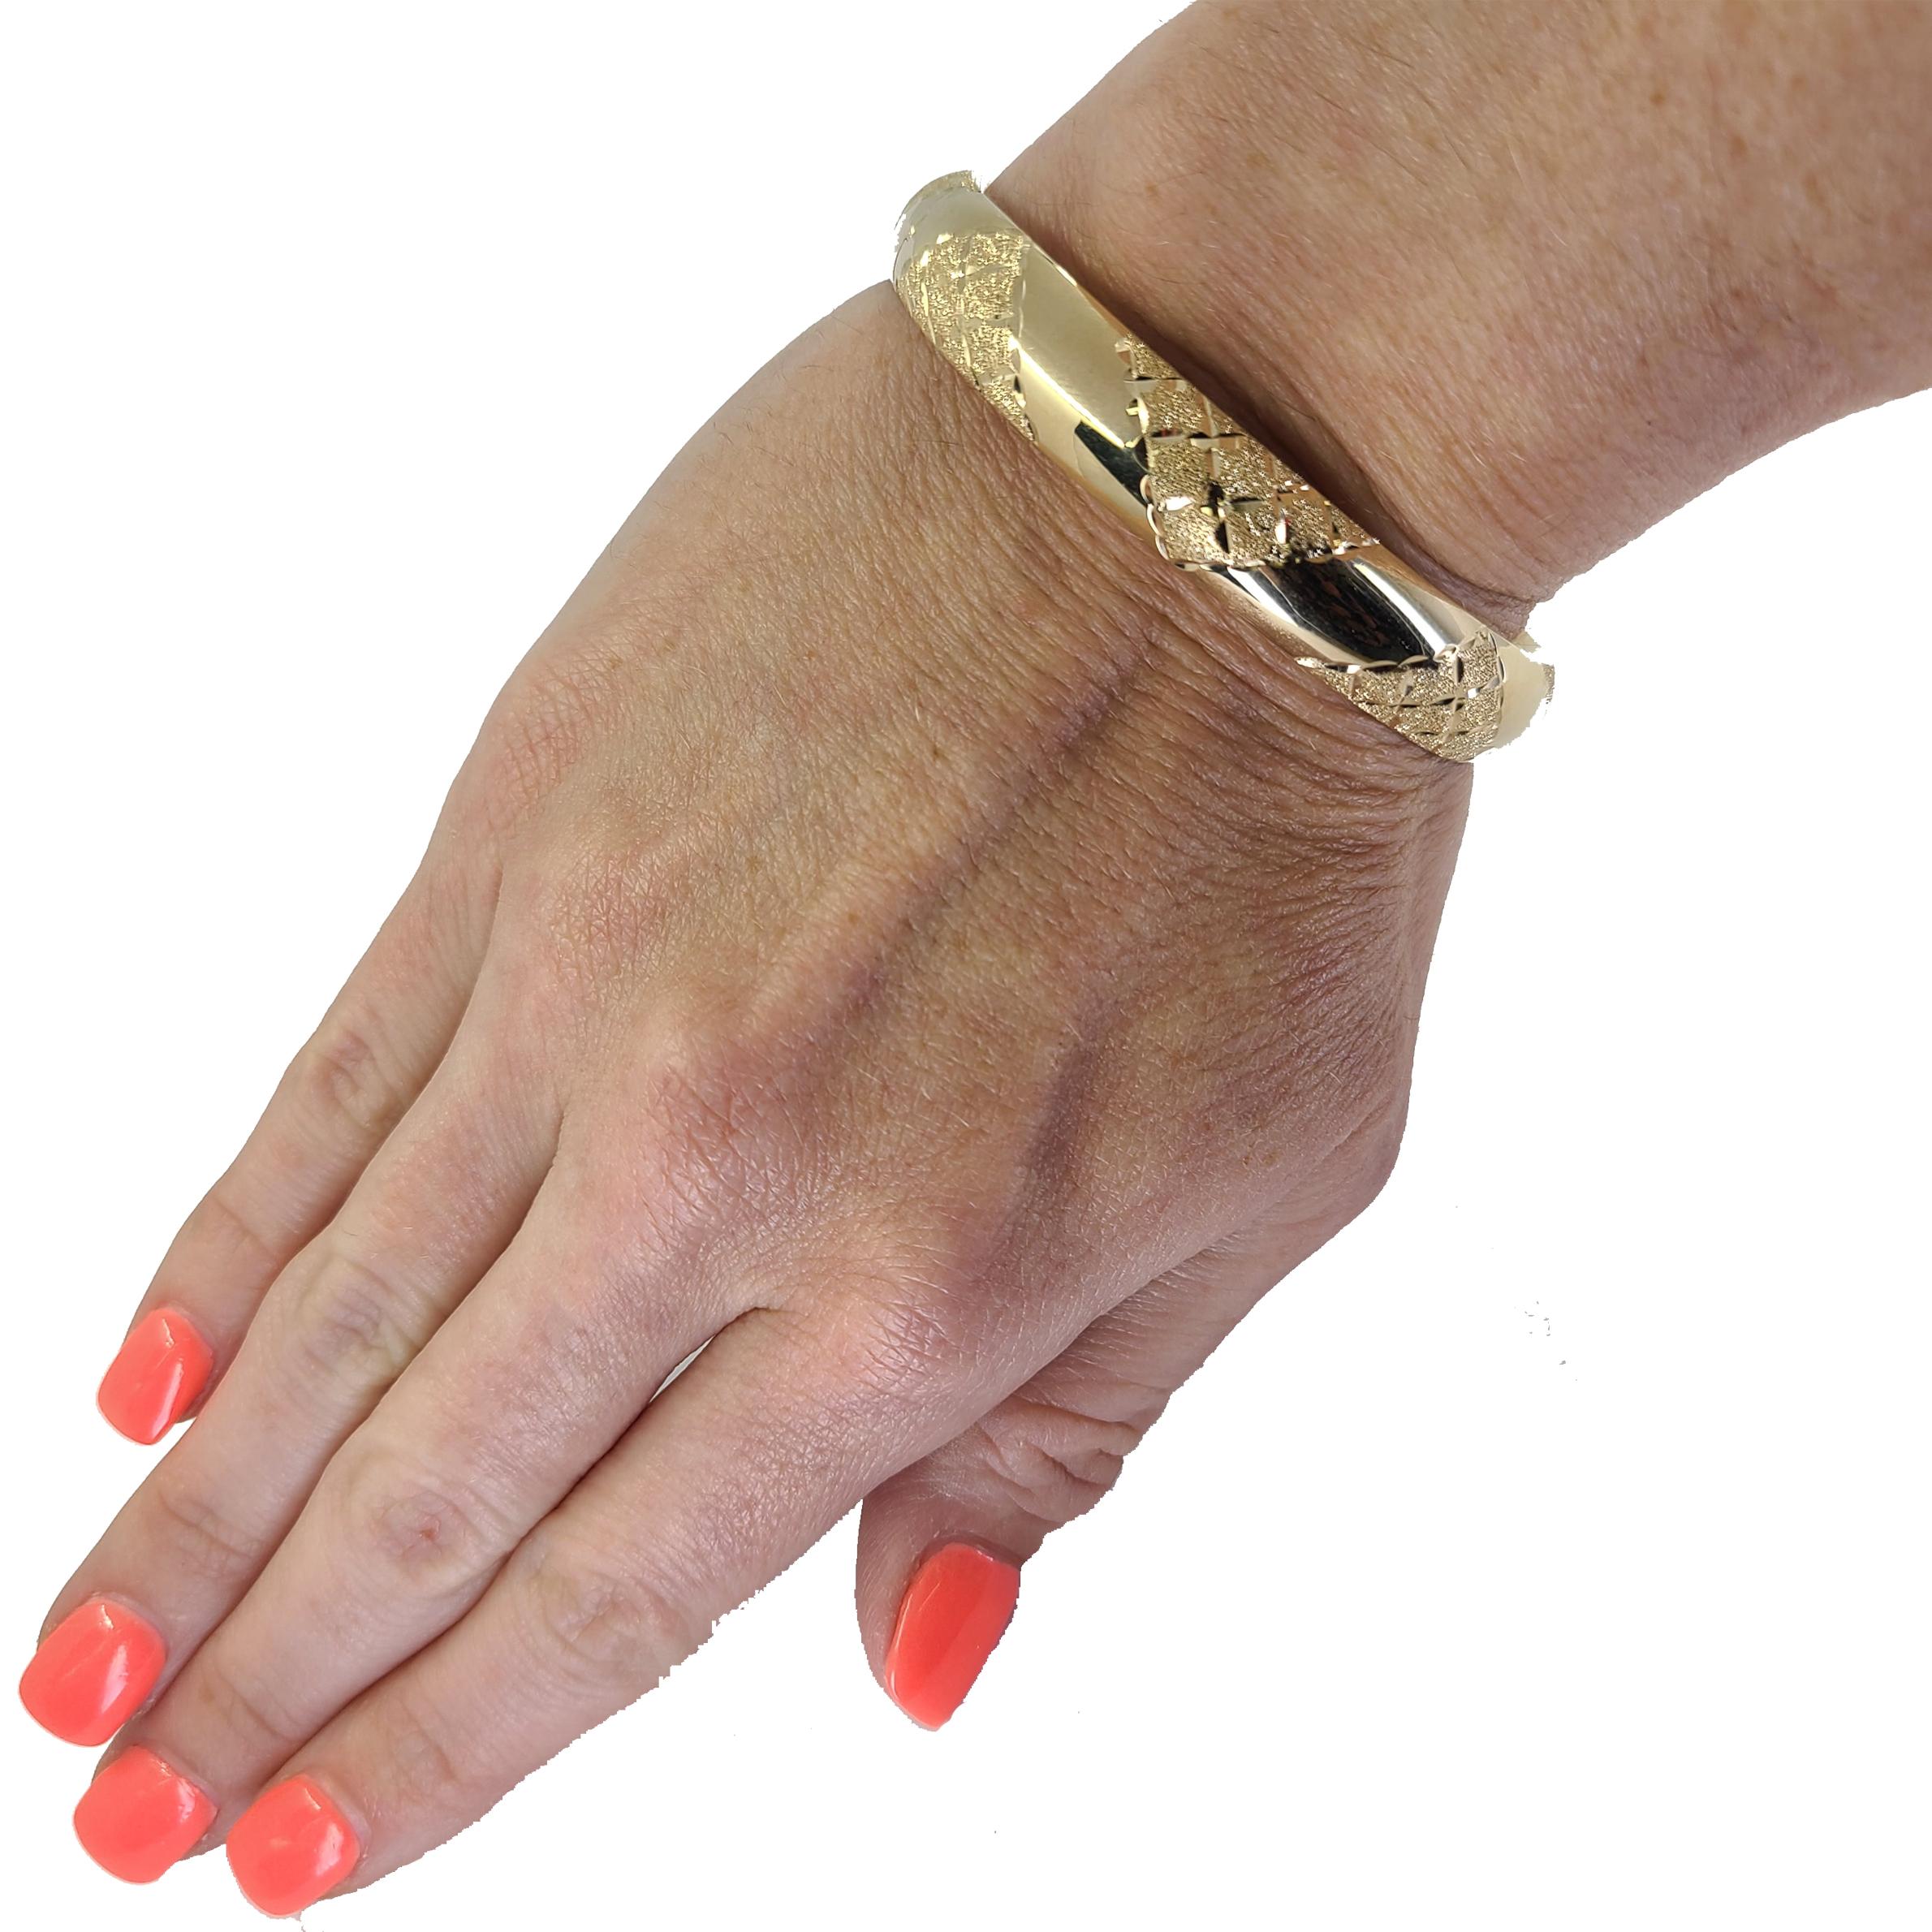 14 Karat Yellow Gold Hinged Bangle Bracelet With Engraved Pyramid Texture Detail. Domed Design With 2.37 Inch Inner Diameter, Fits Up to 7 Inch Wrist. Finished Weight Is 15.6 Grams.